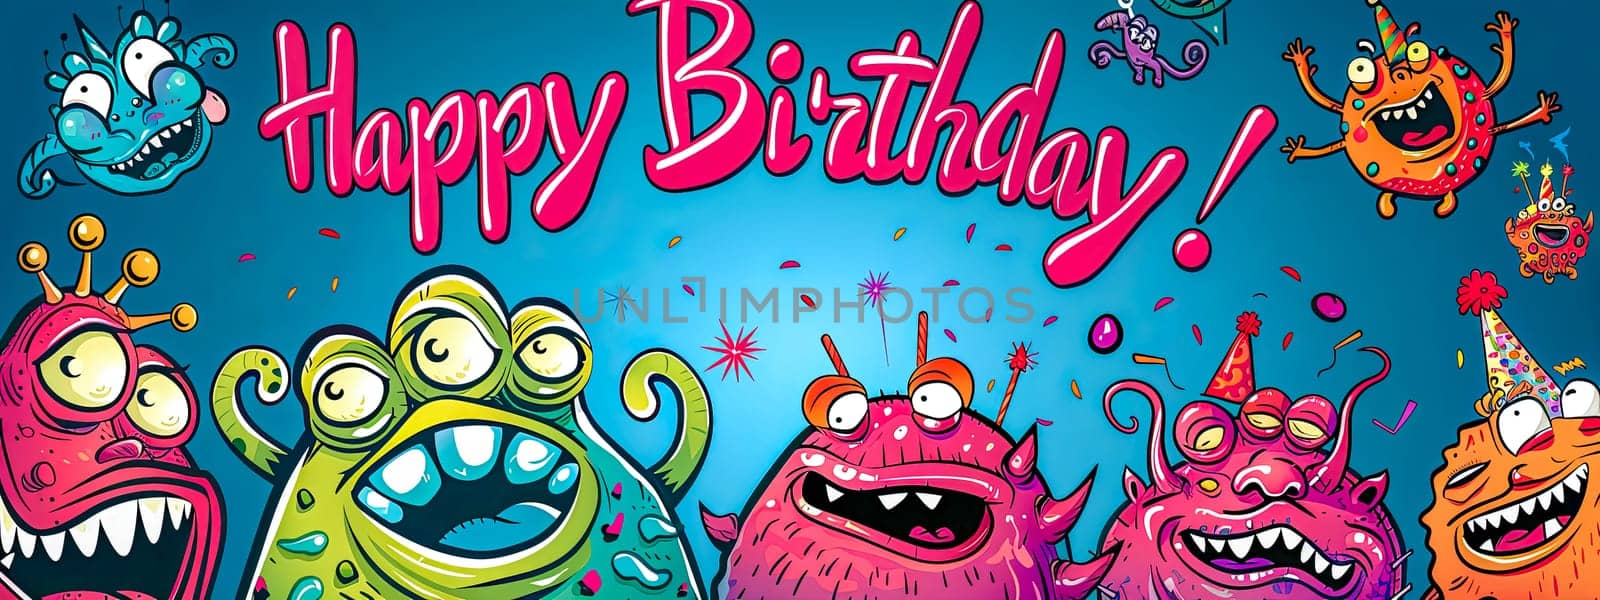 Vibrant illustration of whimsical monsters celebrating with a happy birthday message